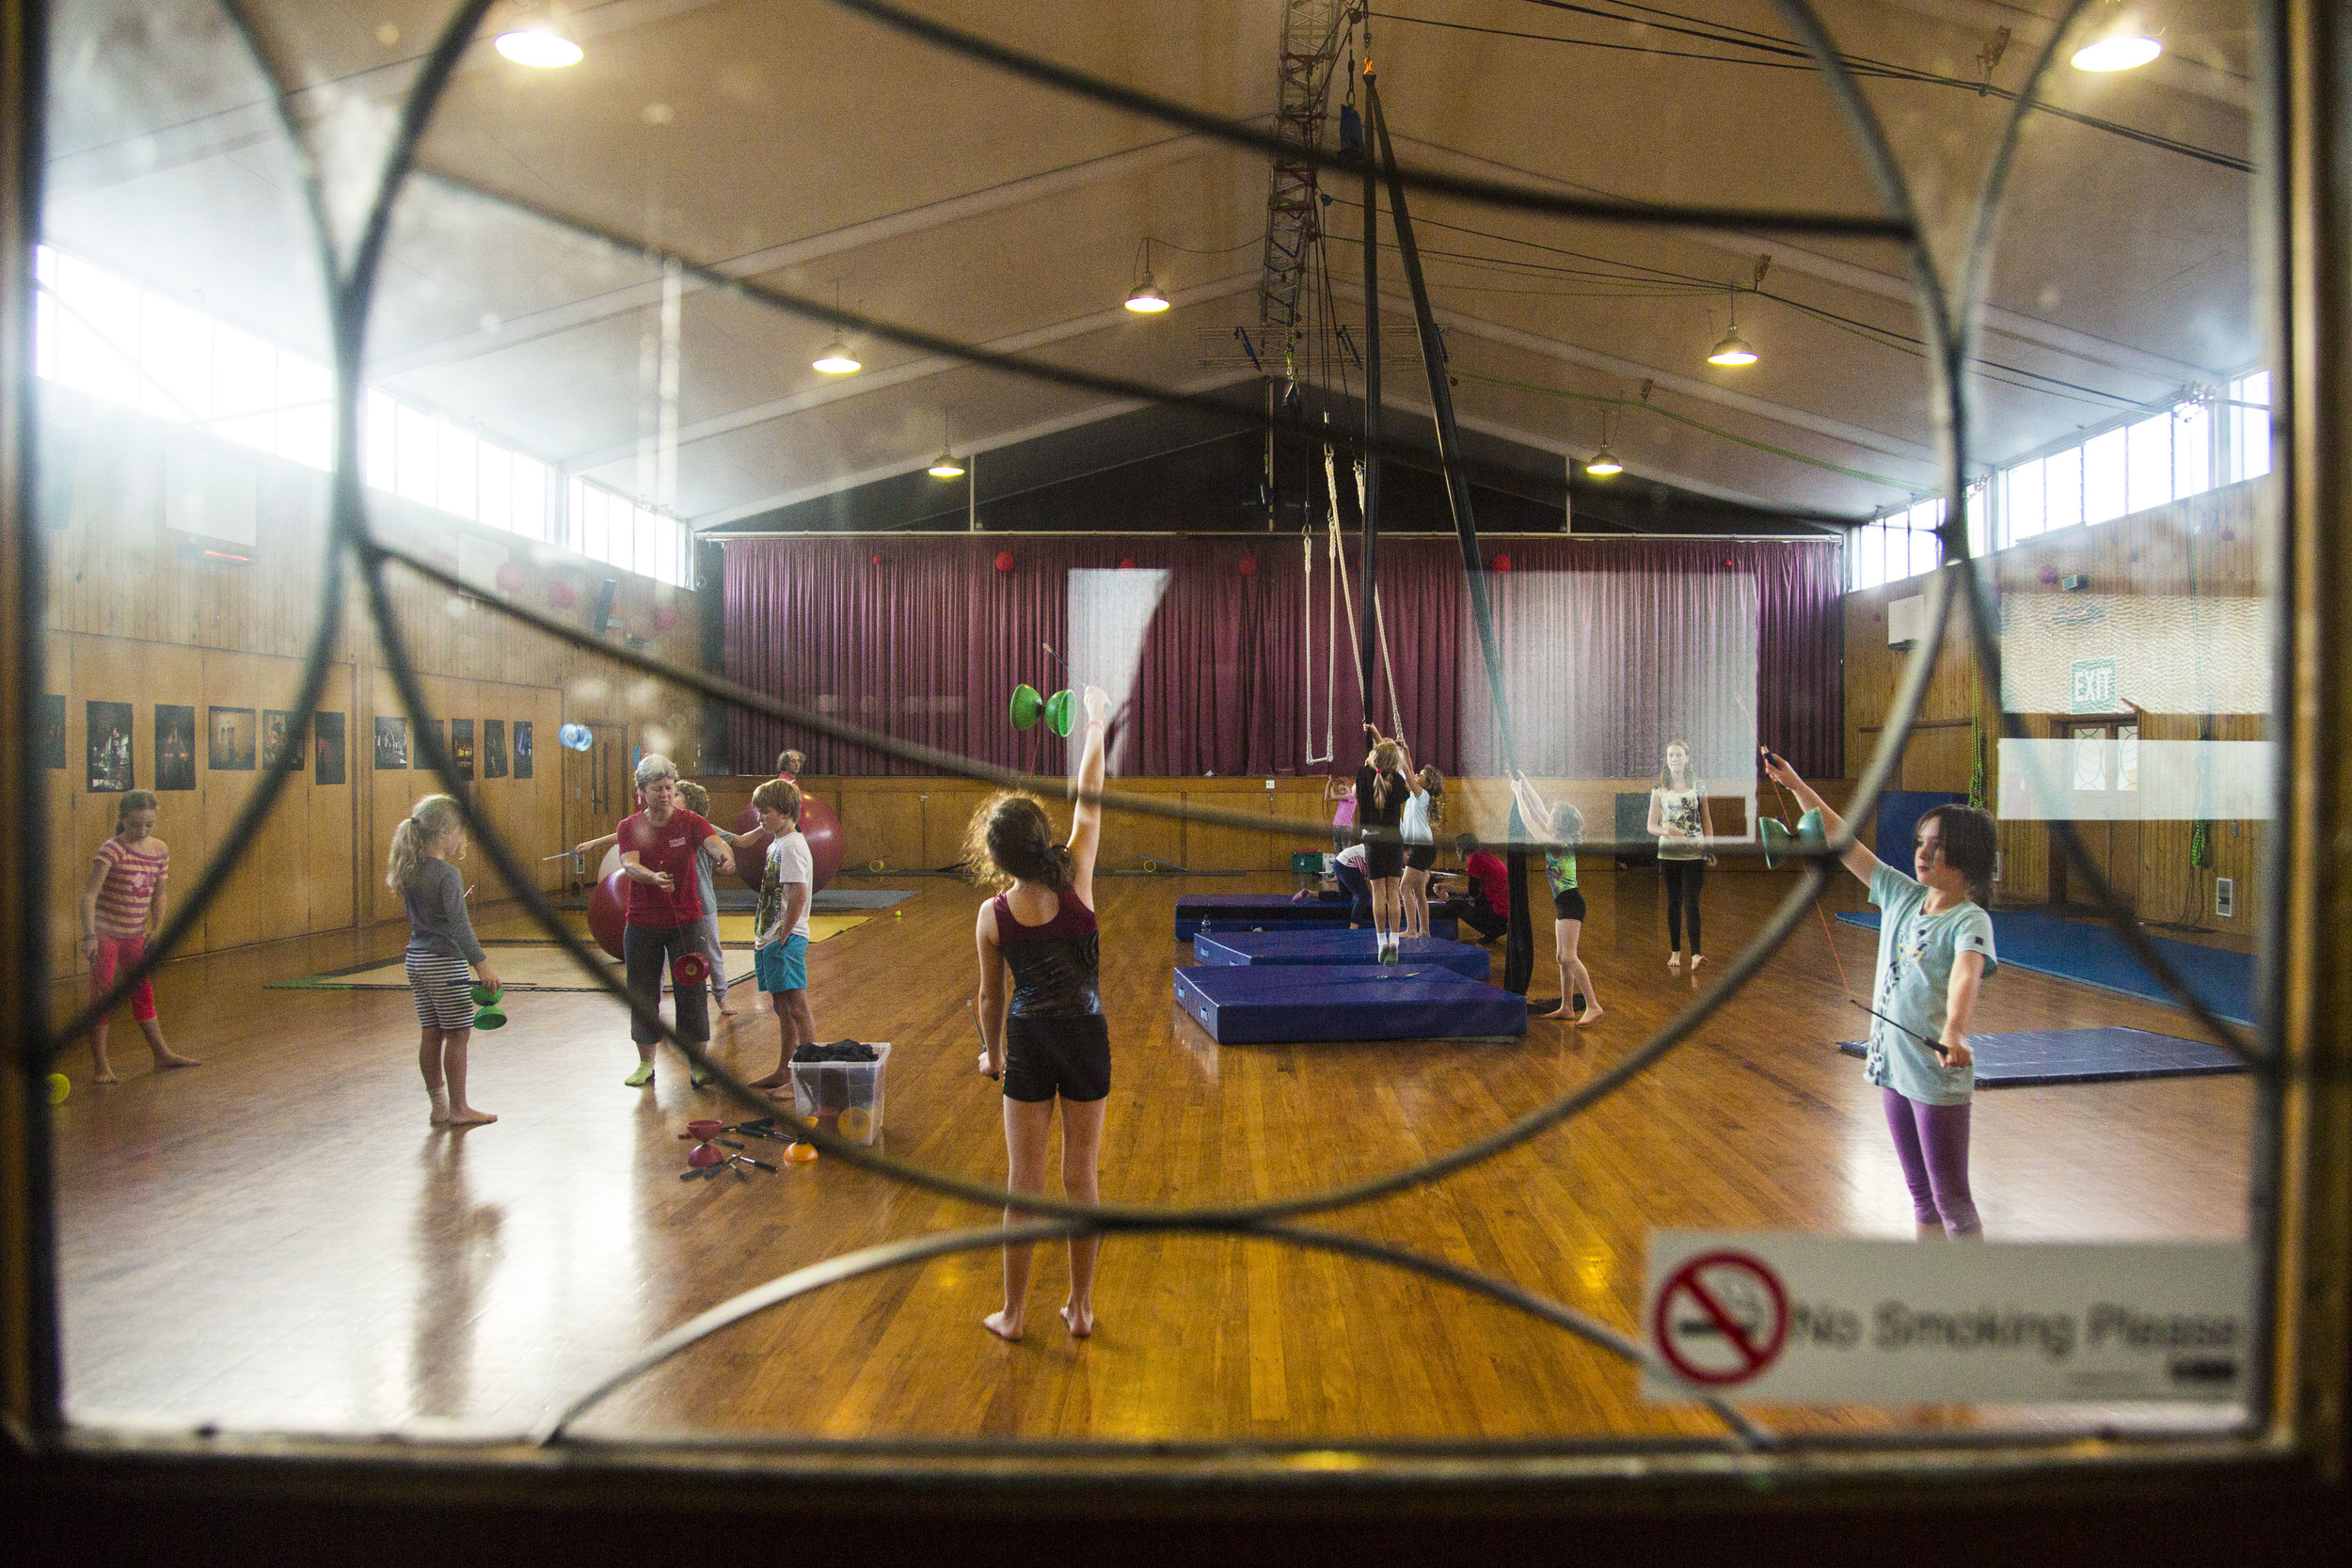  Wingfield and Carrow teach a circus class at the the Christchurch Circus Centre on May 10, 2016 in Christchurch, NZ. "We did lots of shows to help people deal with stress when food was being handed out and people were given support. It was interesti